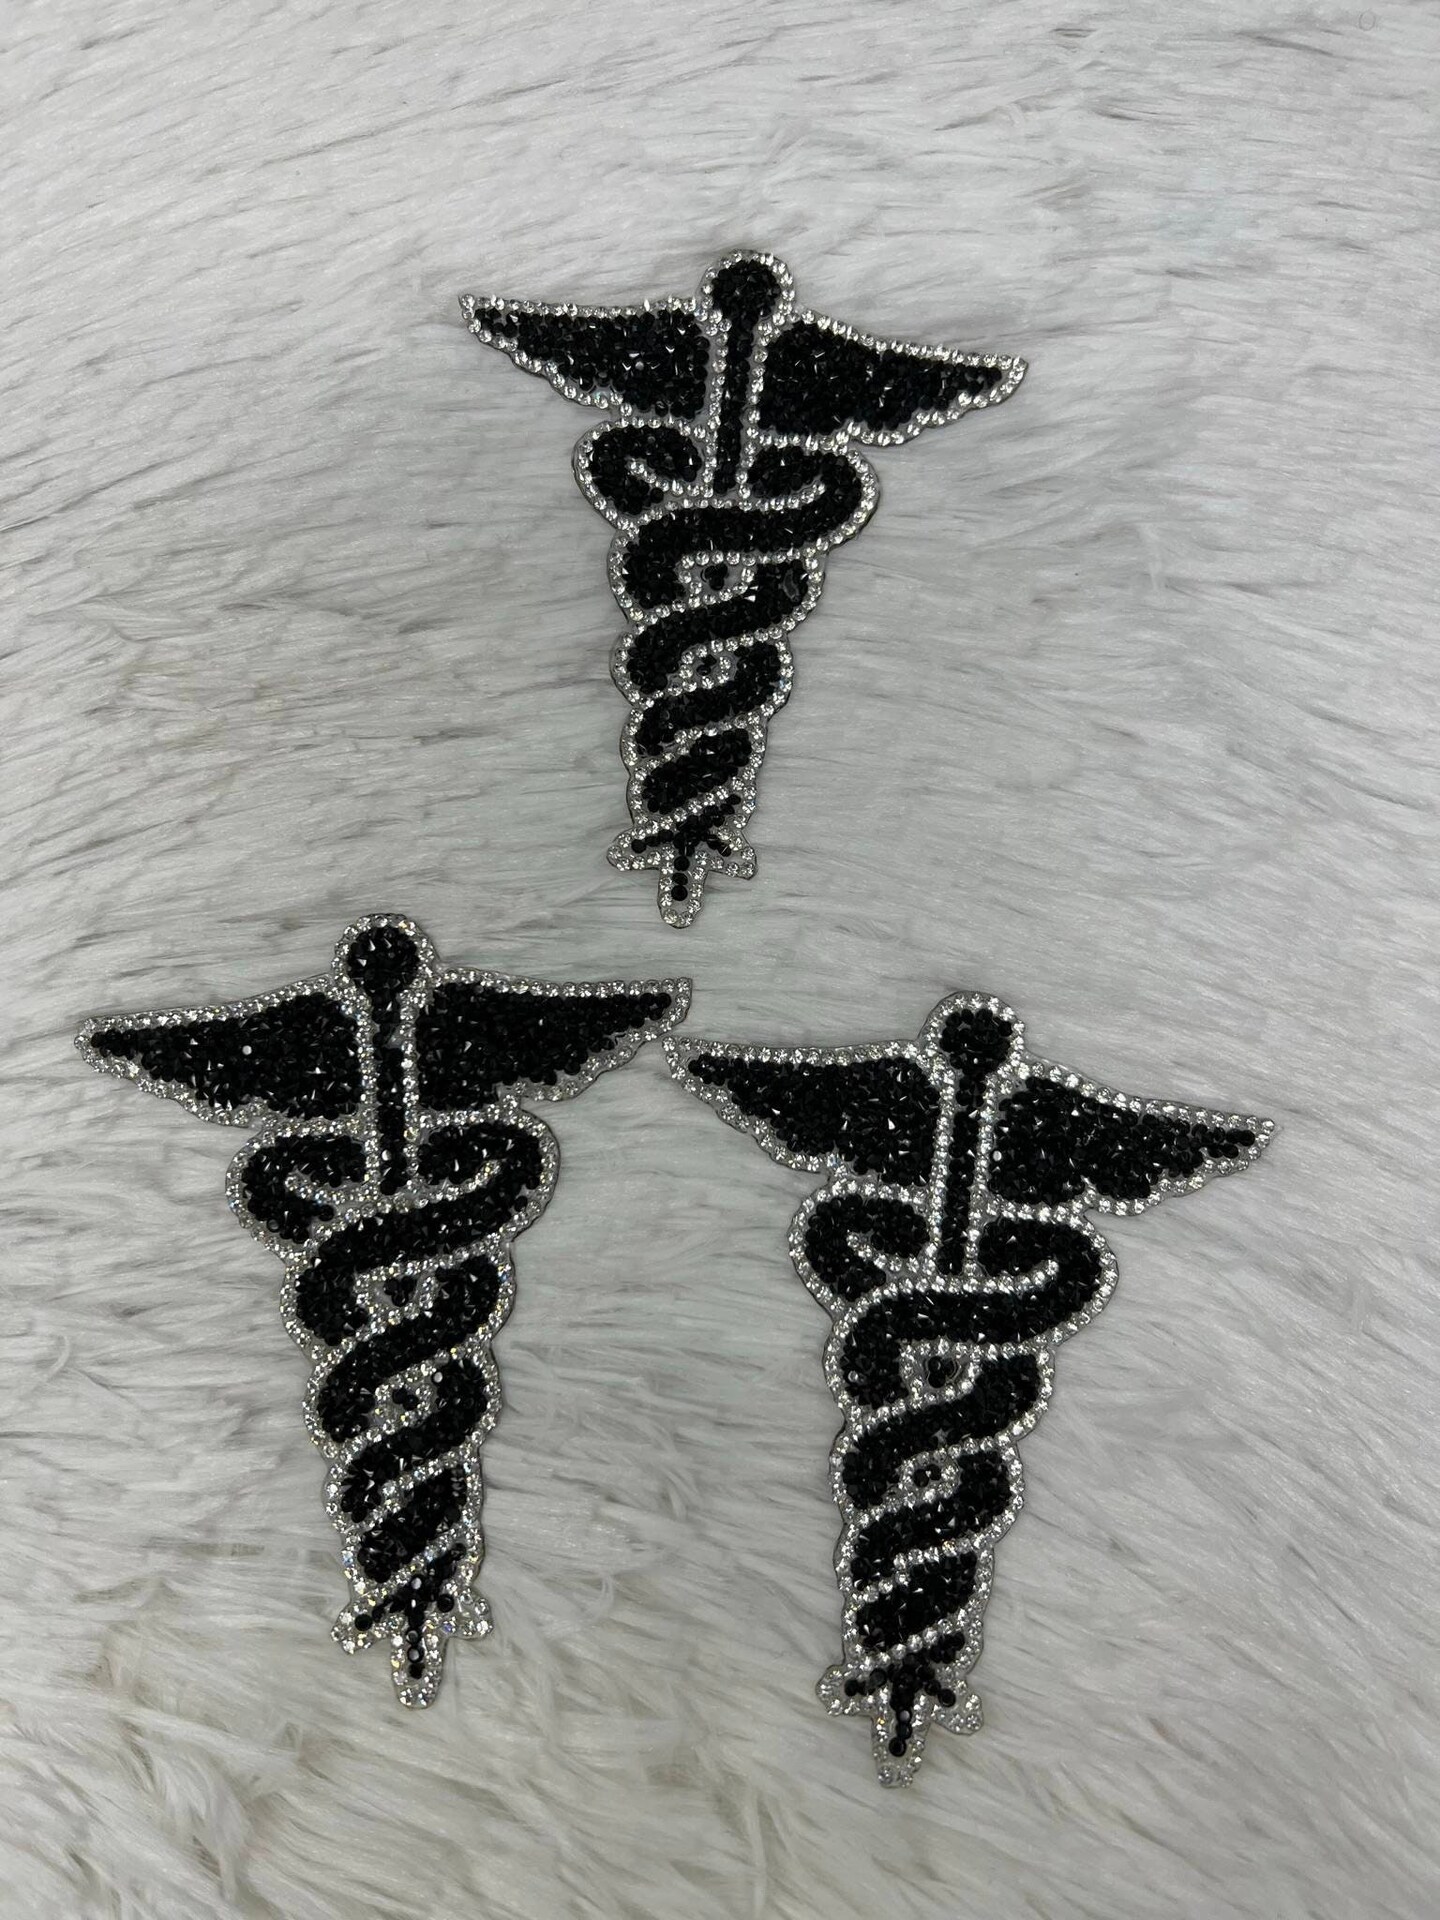 EMT Iron-on Embroidered Patch